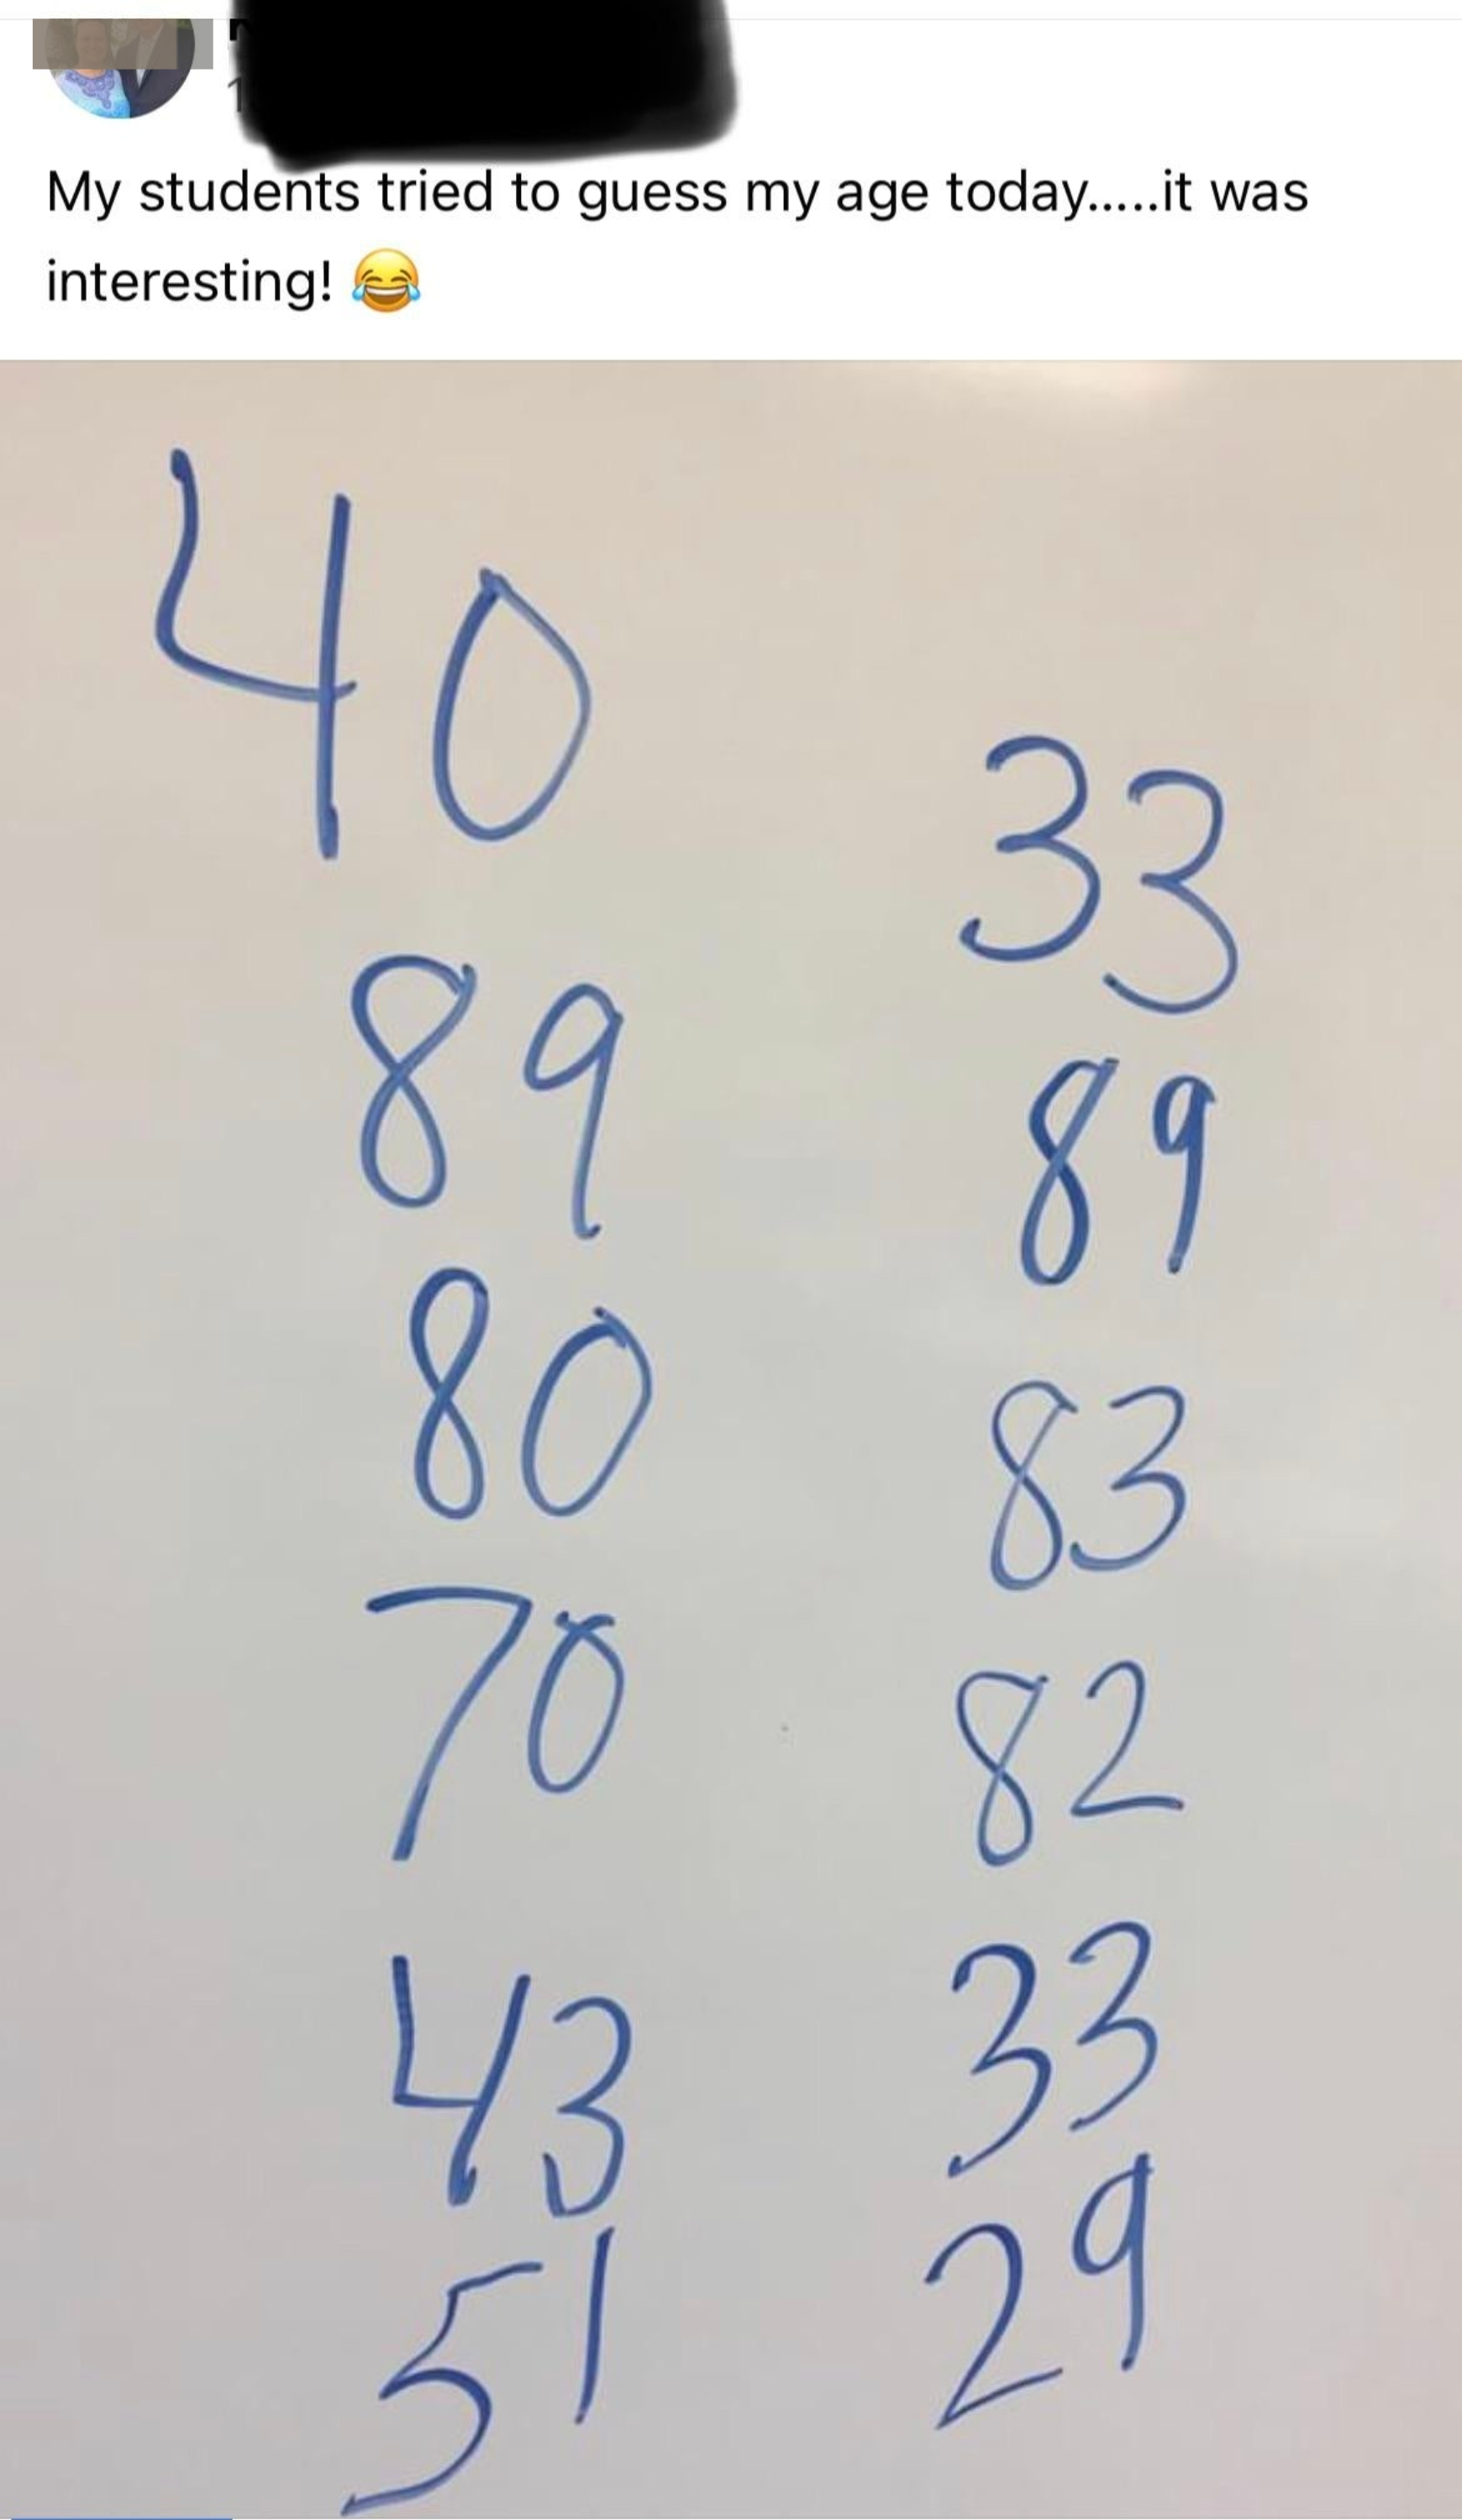 Students tried to guess their teacher&#x27;s age and guessed everything from 29 to 89